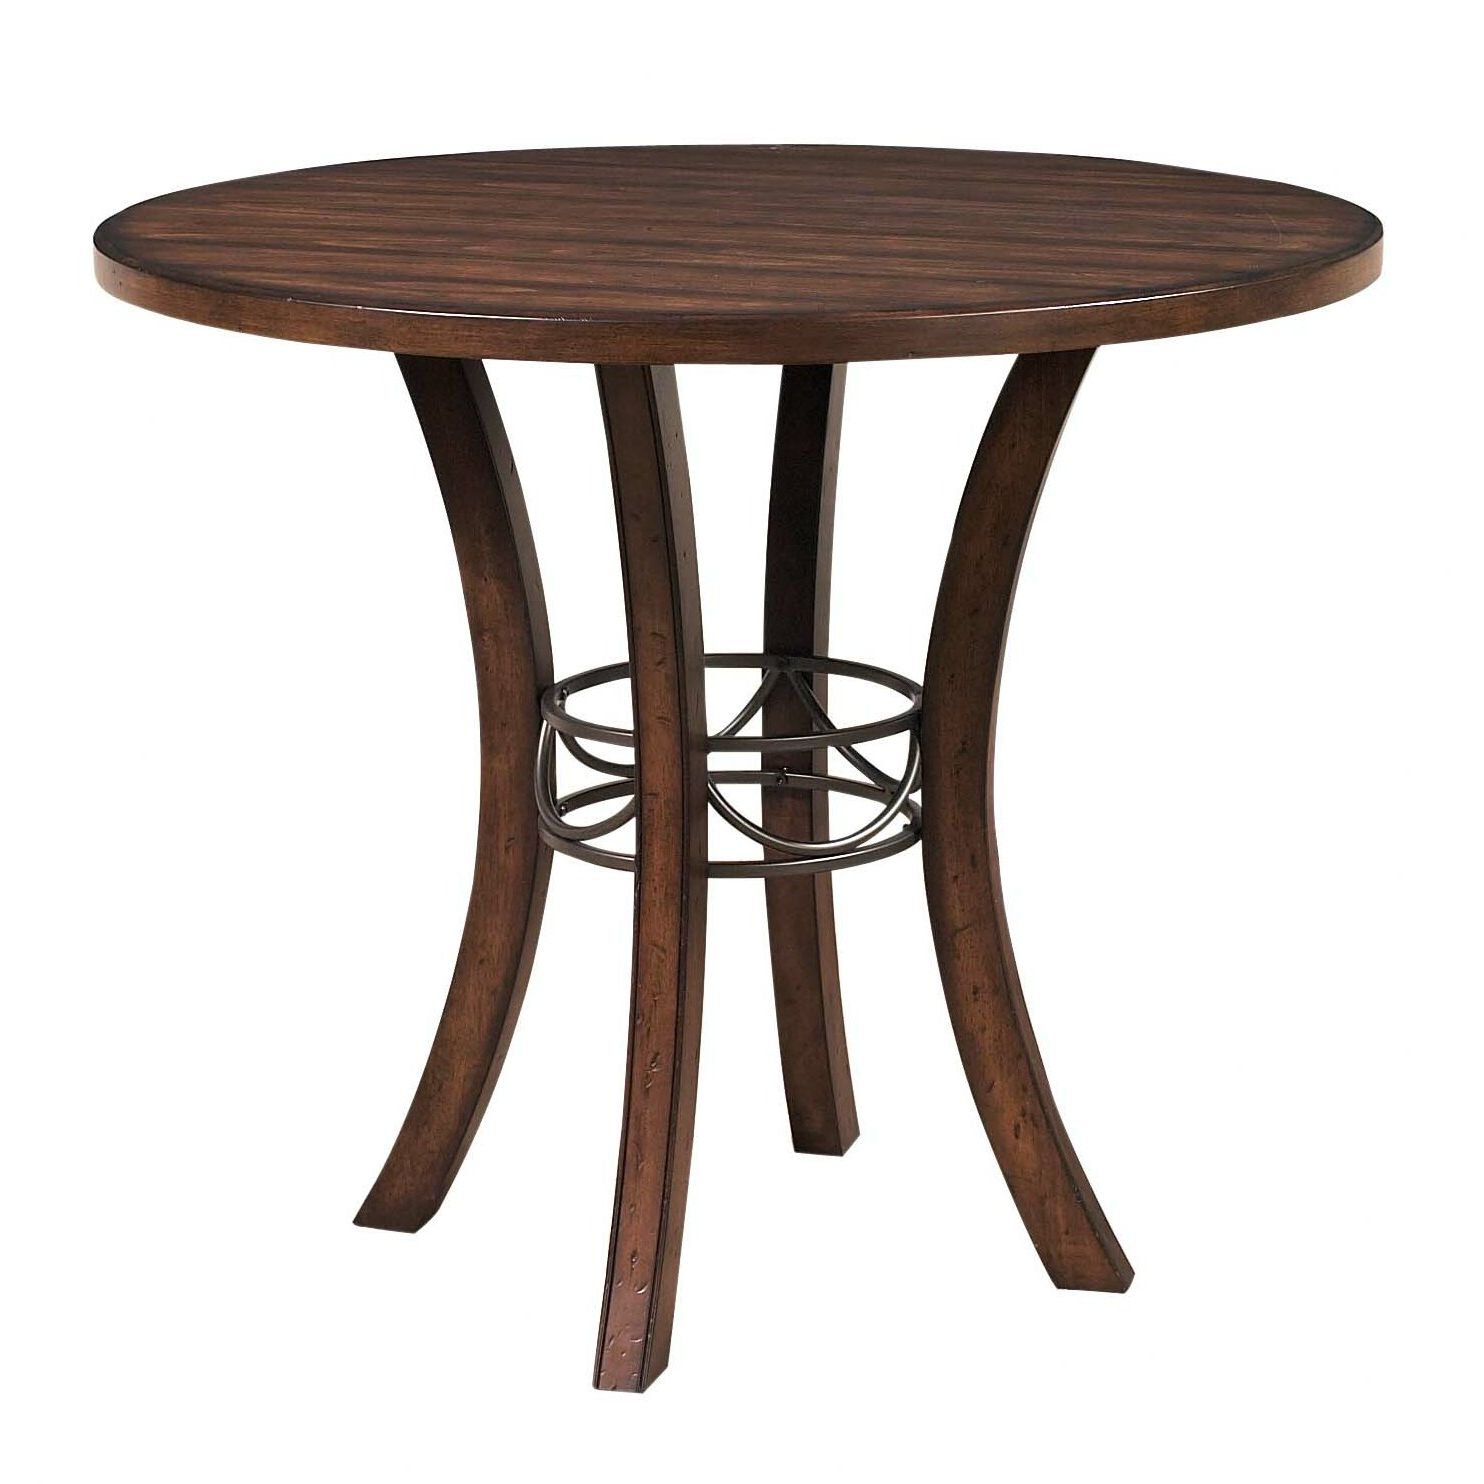 Fashionable Hillsdale Cameron Round Counter Height Dining Table For Bushrah Counter Height Pedestal Dining Tables (View 11 of 20)